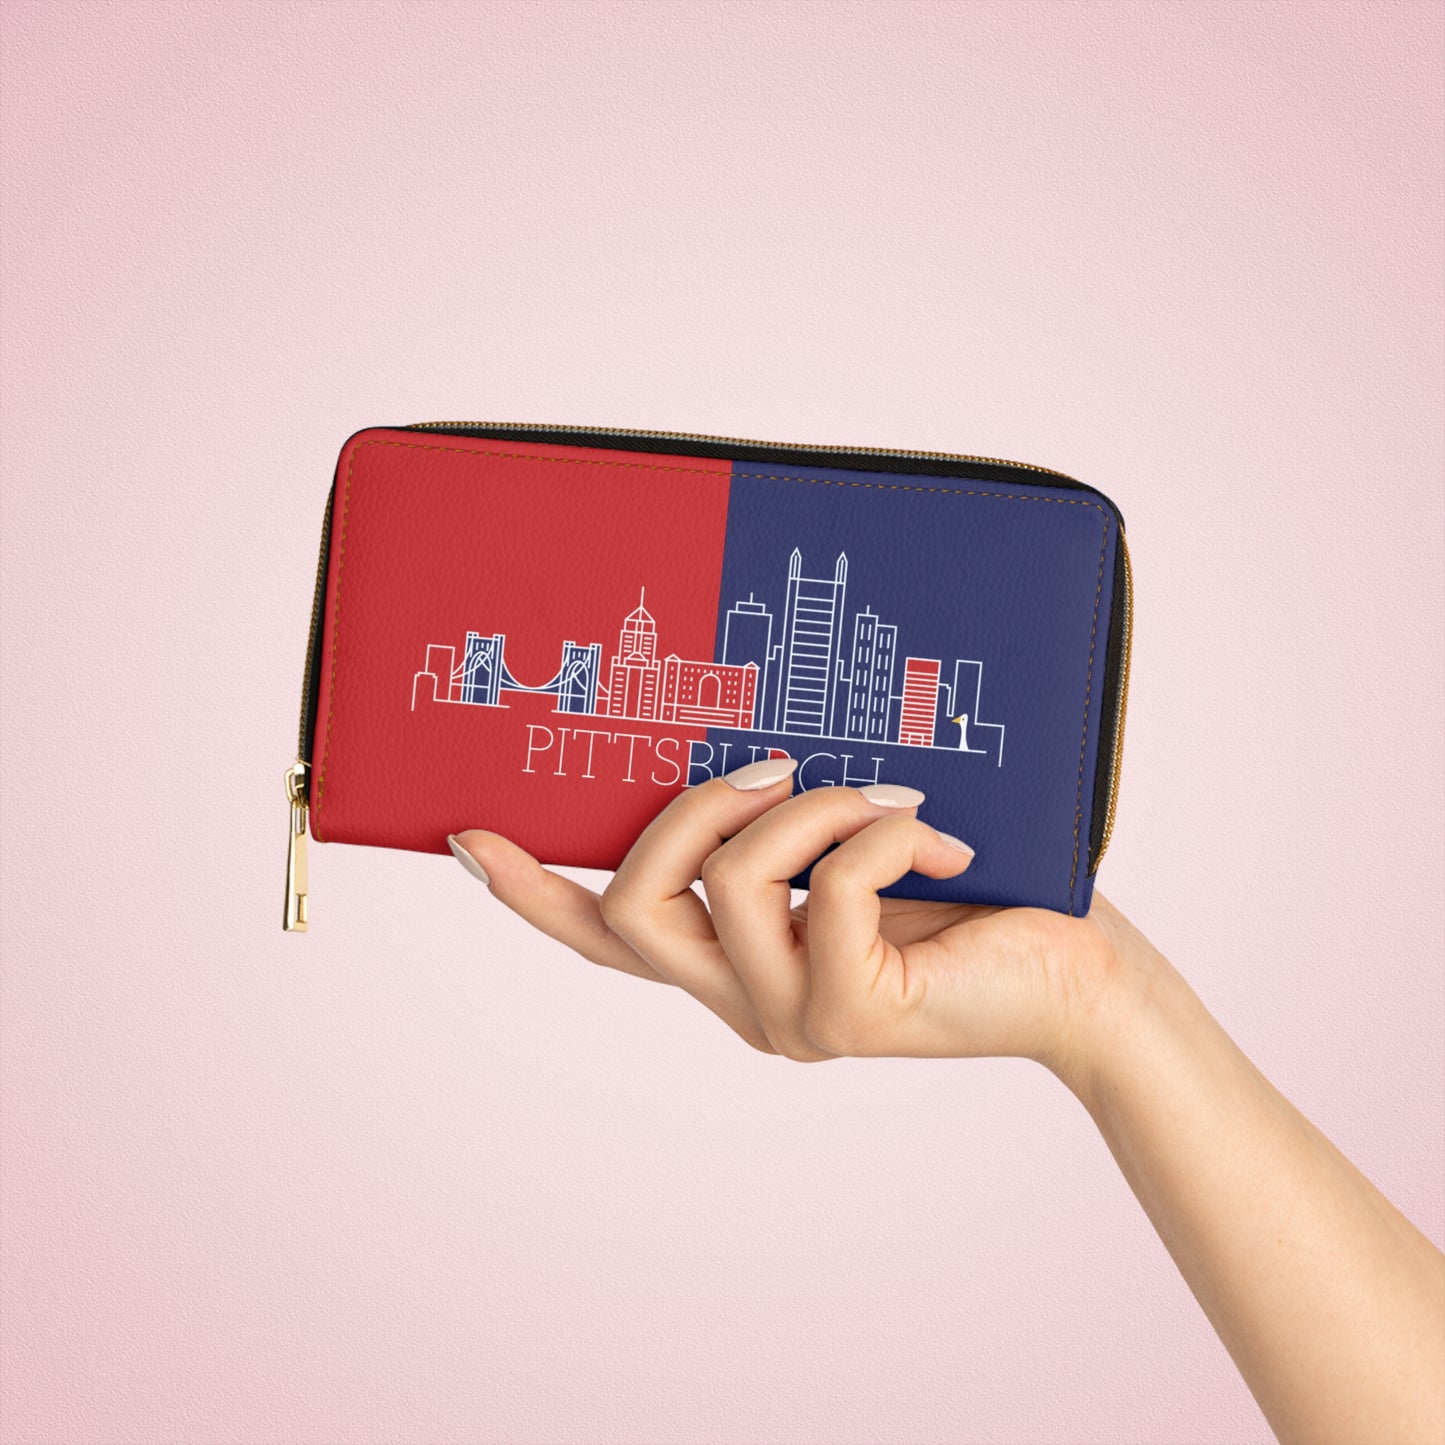 Pittsburgh - Red White and Blue City series - Zipper Wallet